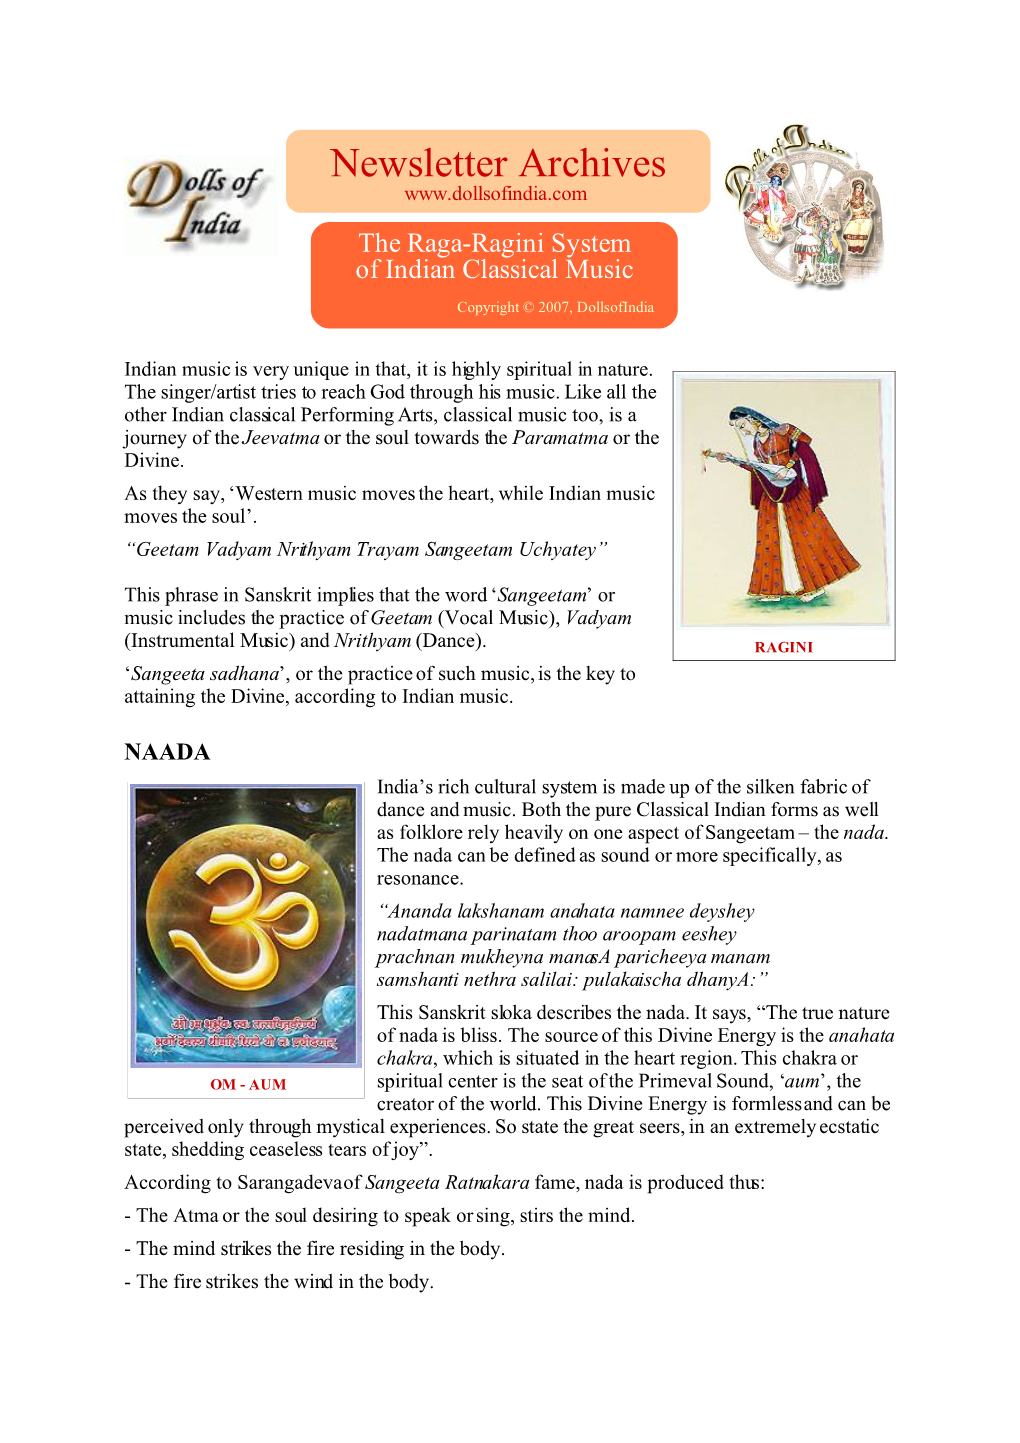 Newsletter Archives the Raga-Ragini System of Indian Classical Music